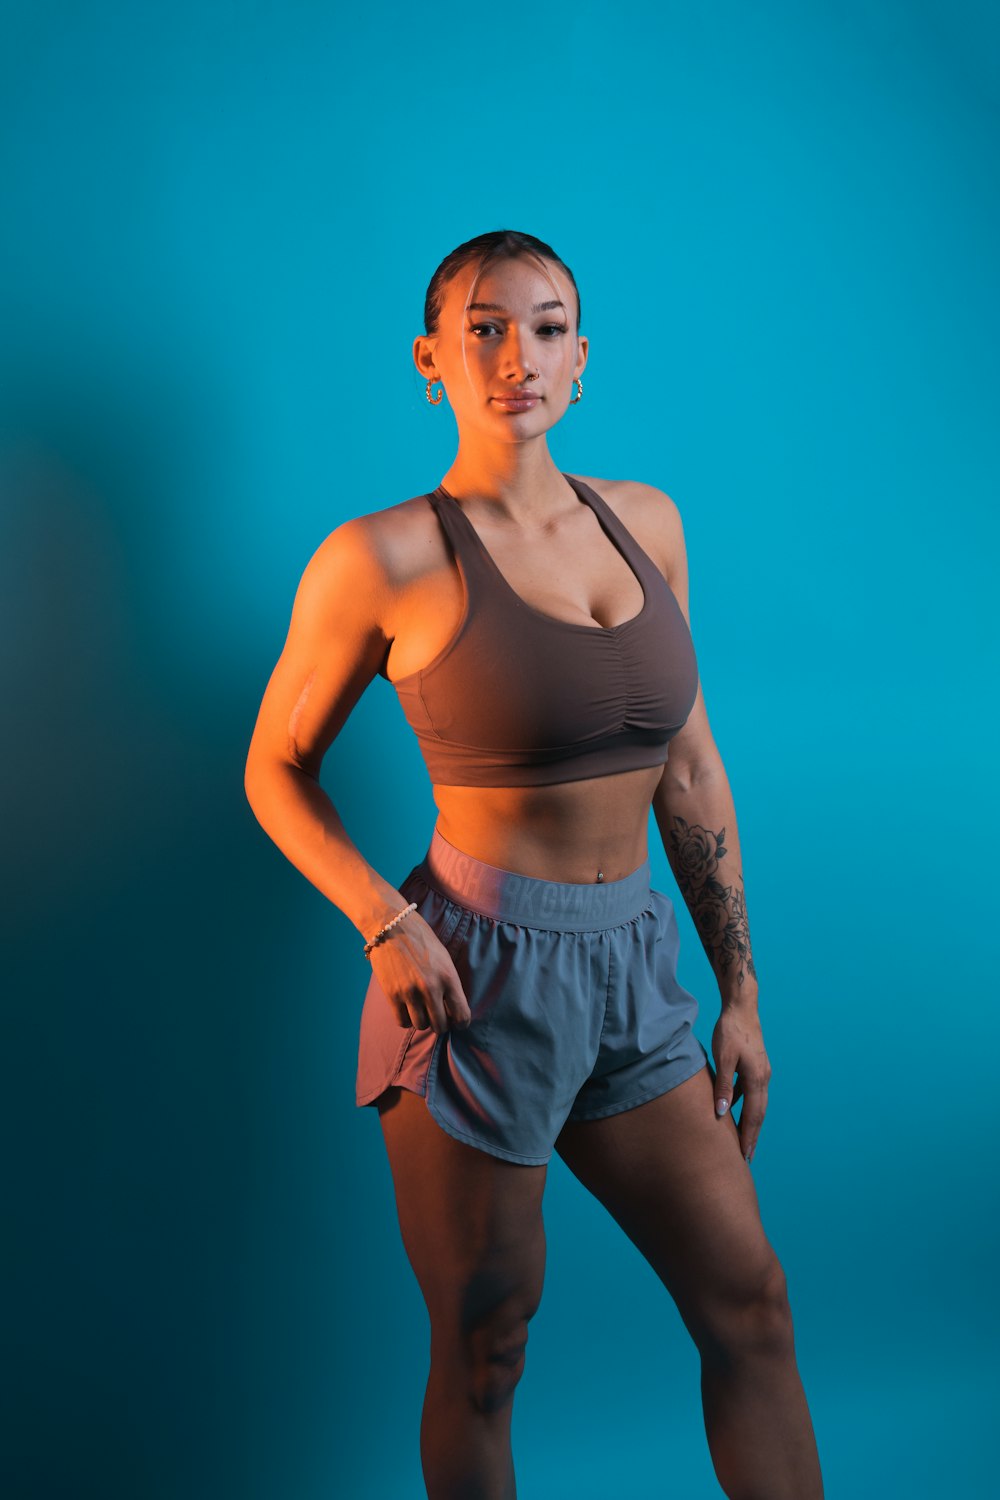 a woman in a sports bra top posing for a picture